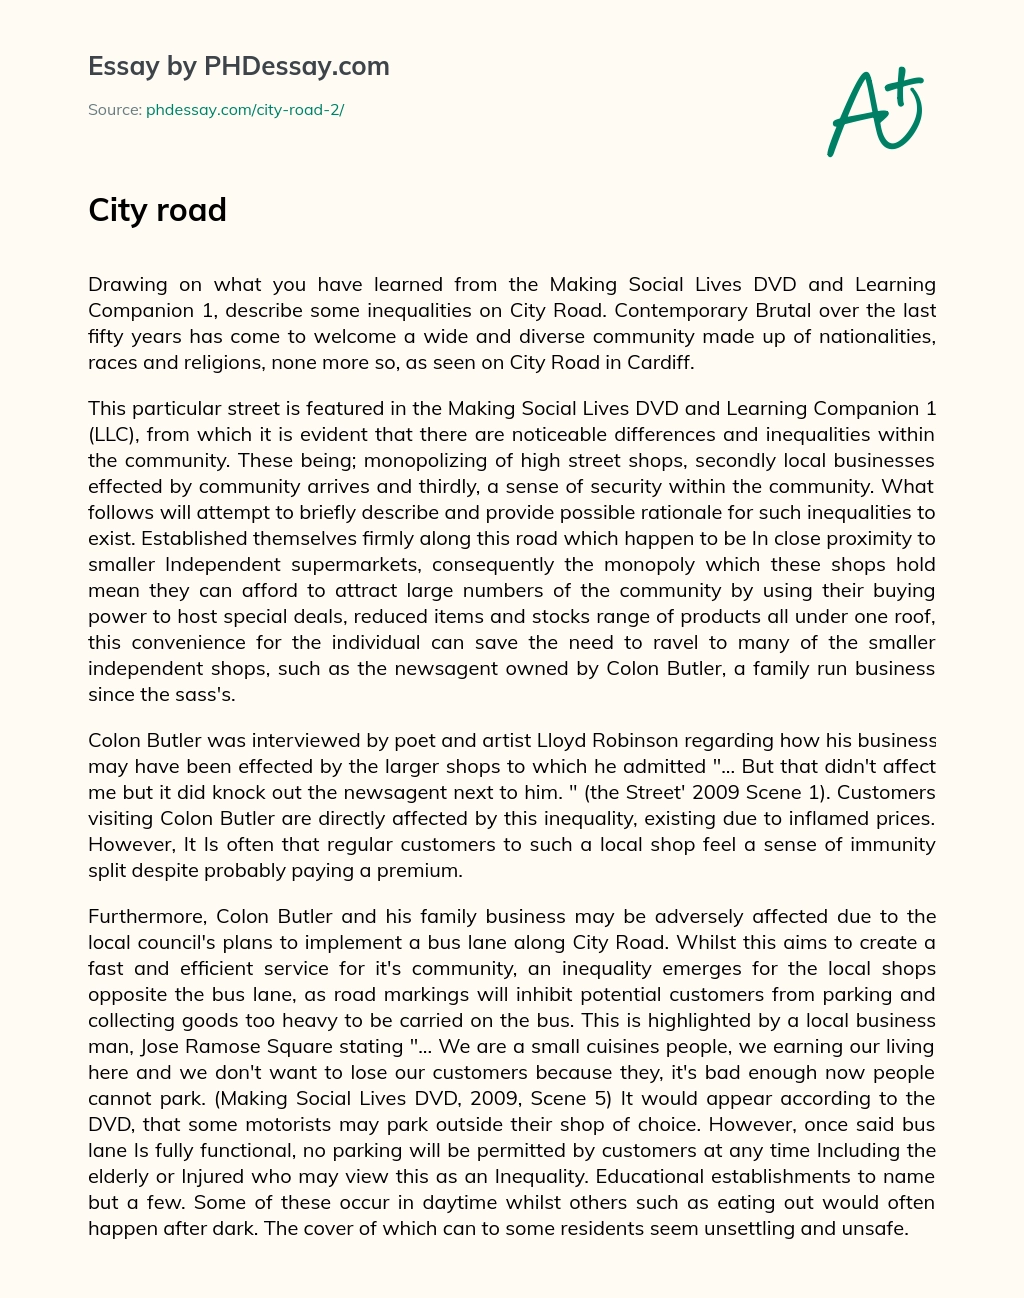 Inequalities on City Road: Monopolizing of High Street Shops, Impact on Local Businesses, and Sense of Security within the Community essay